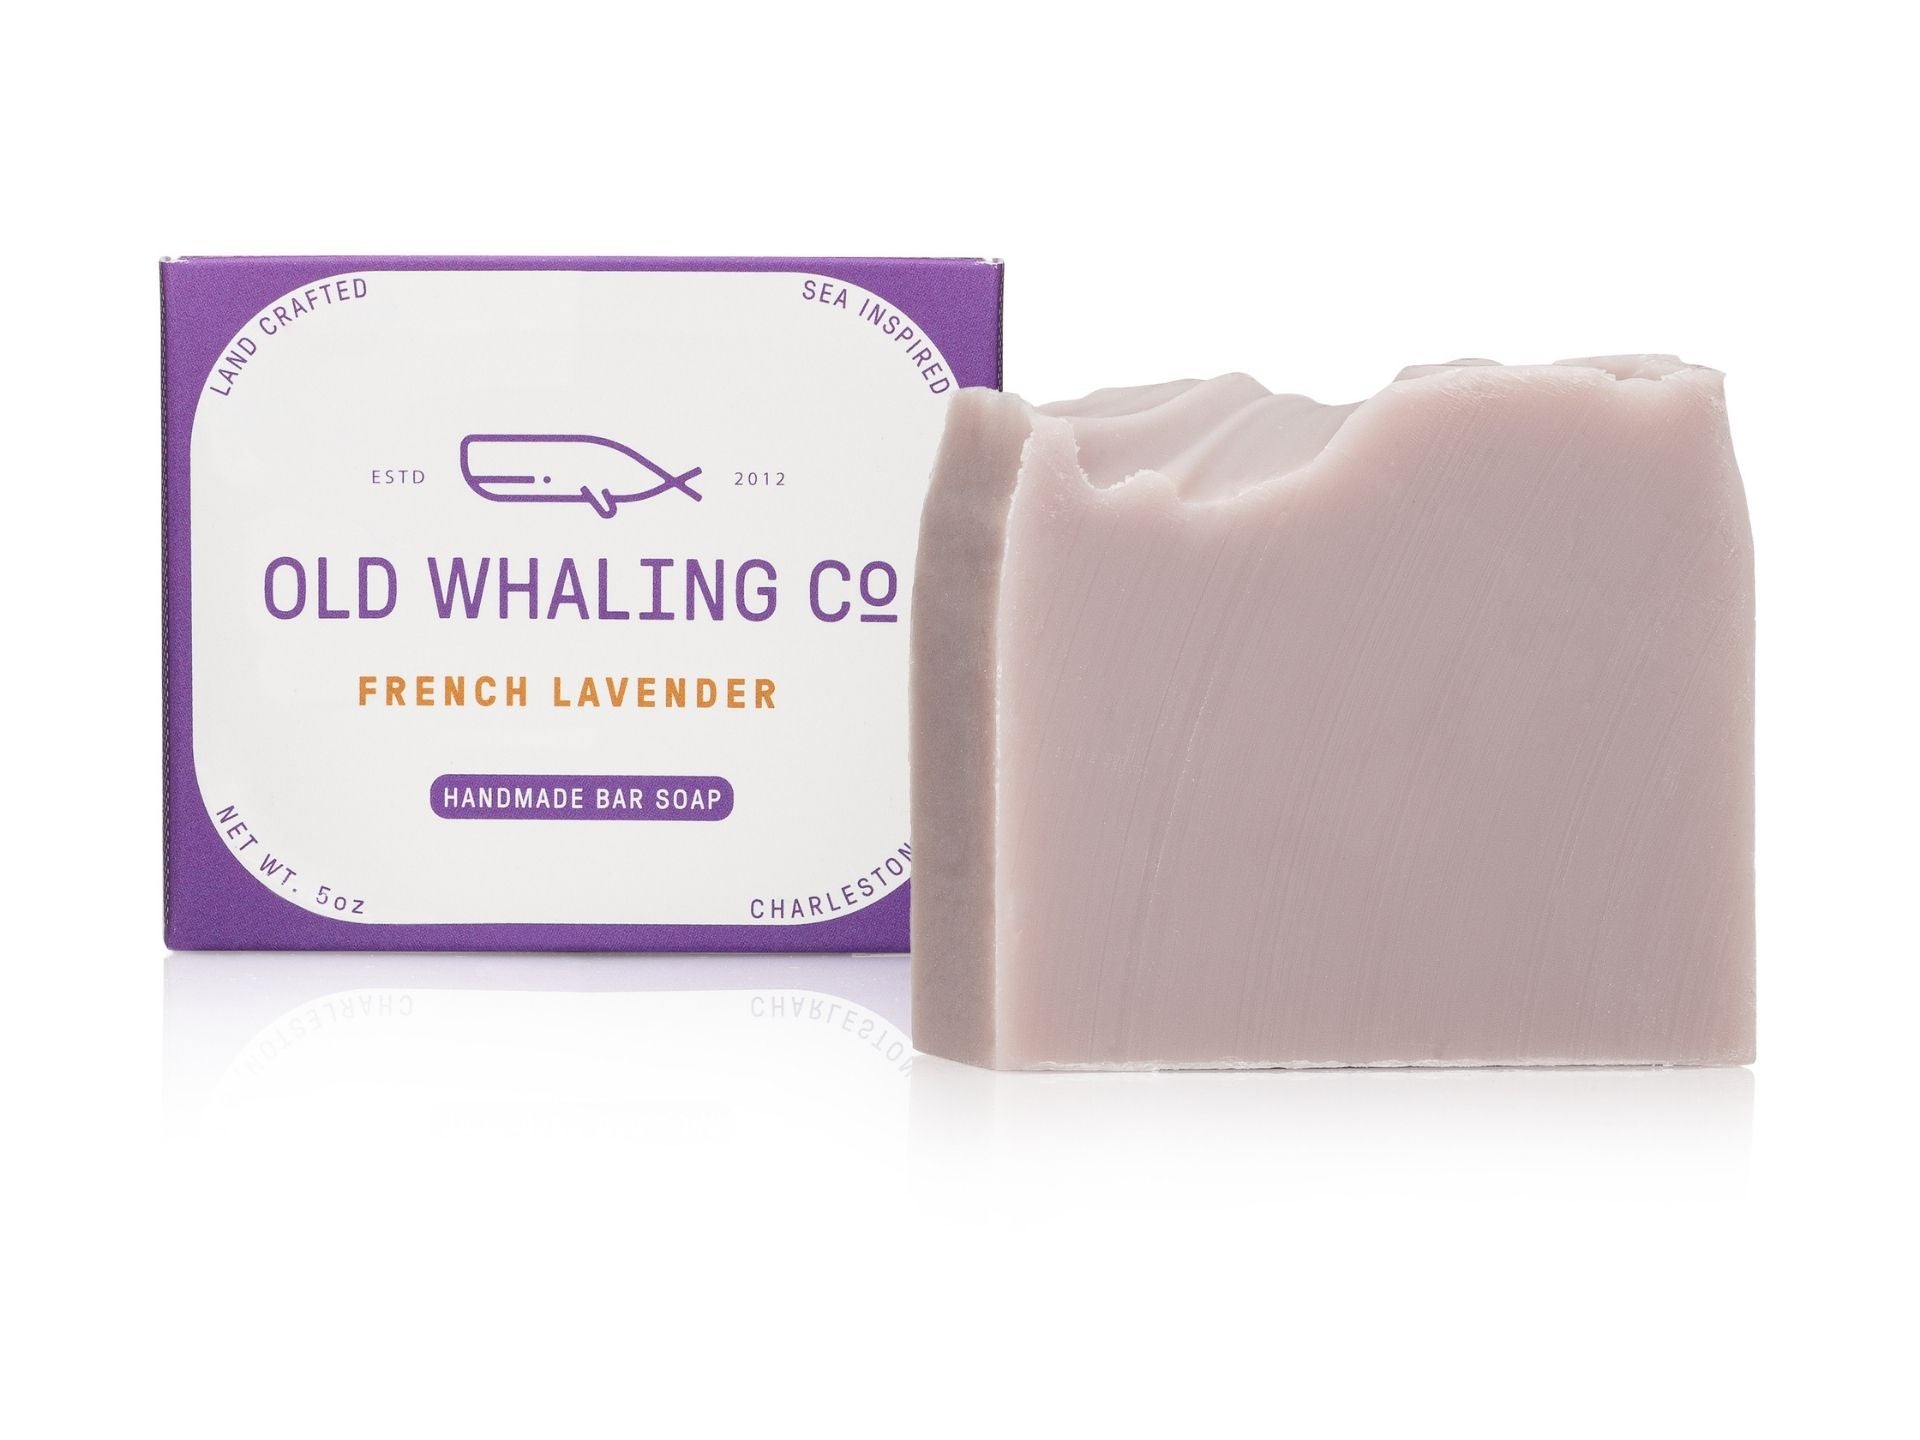 Old Whaling Co. Bar Soap